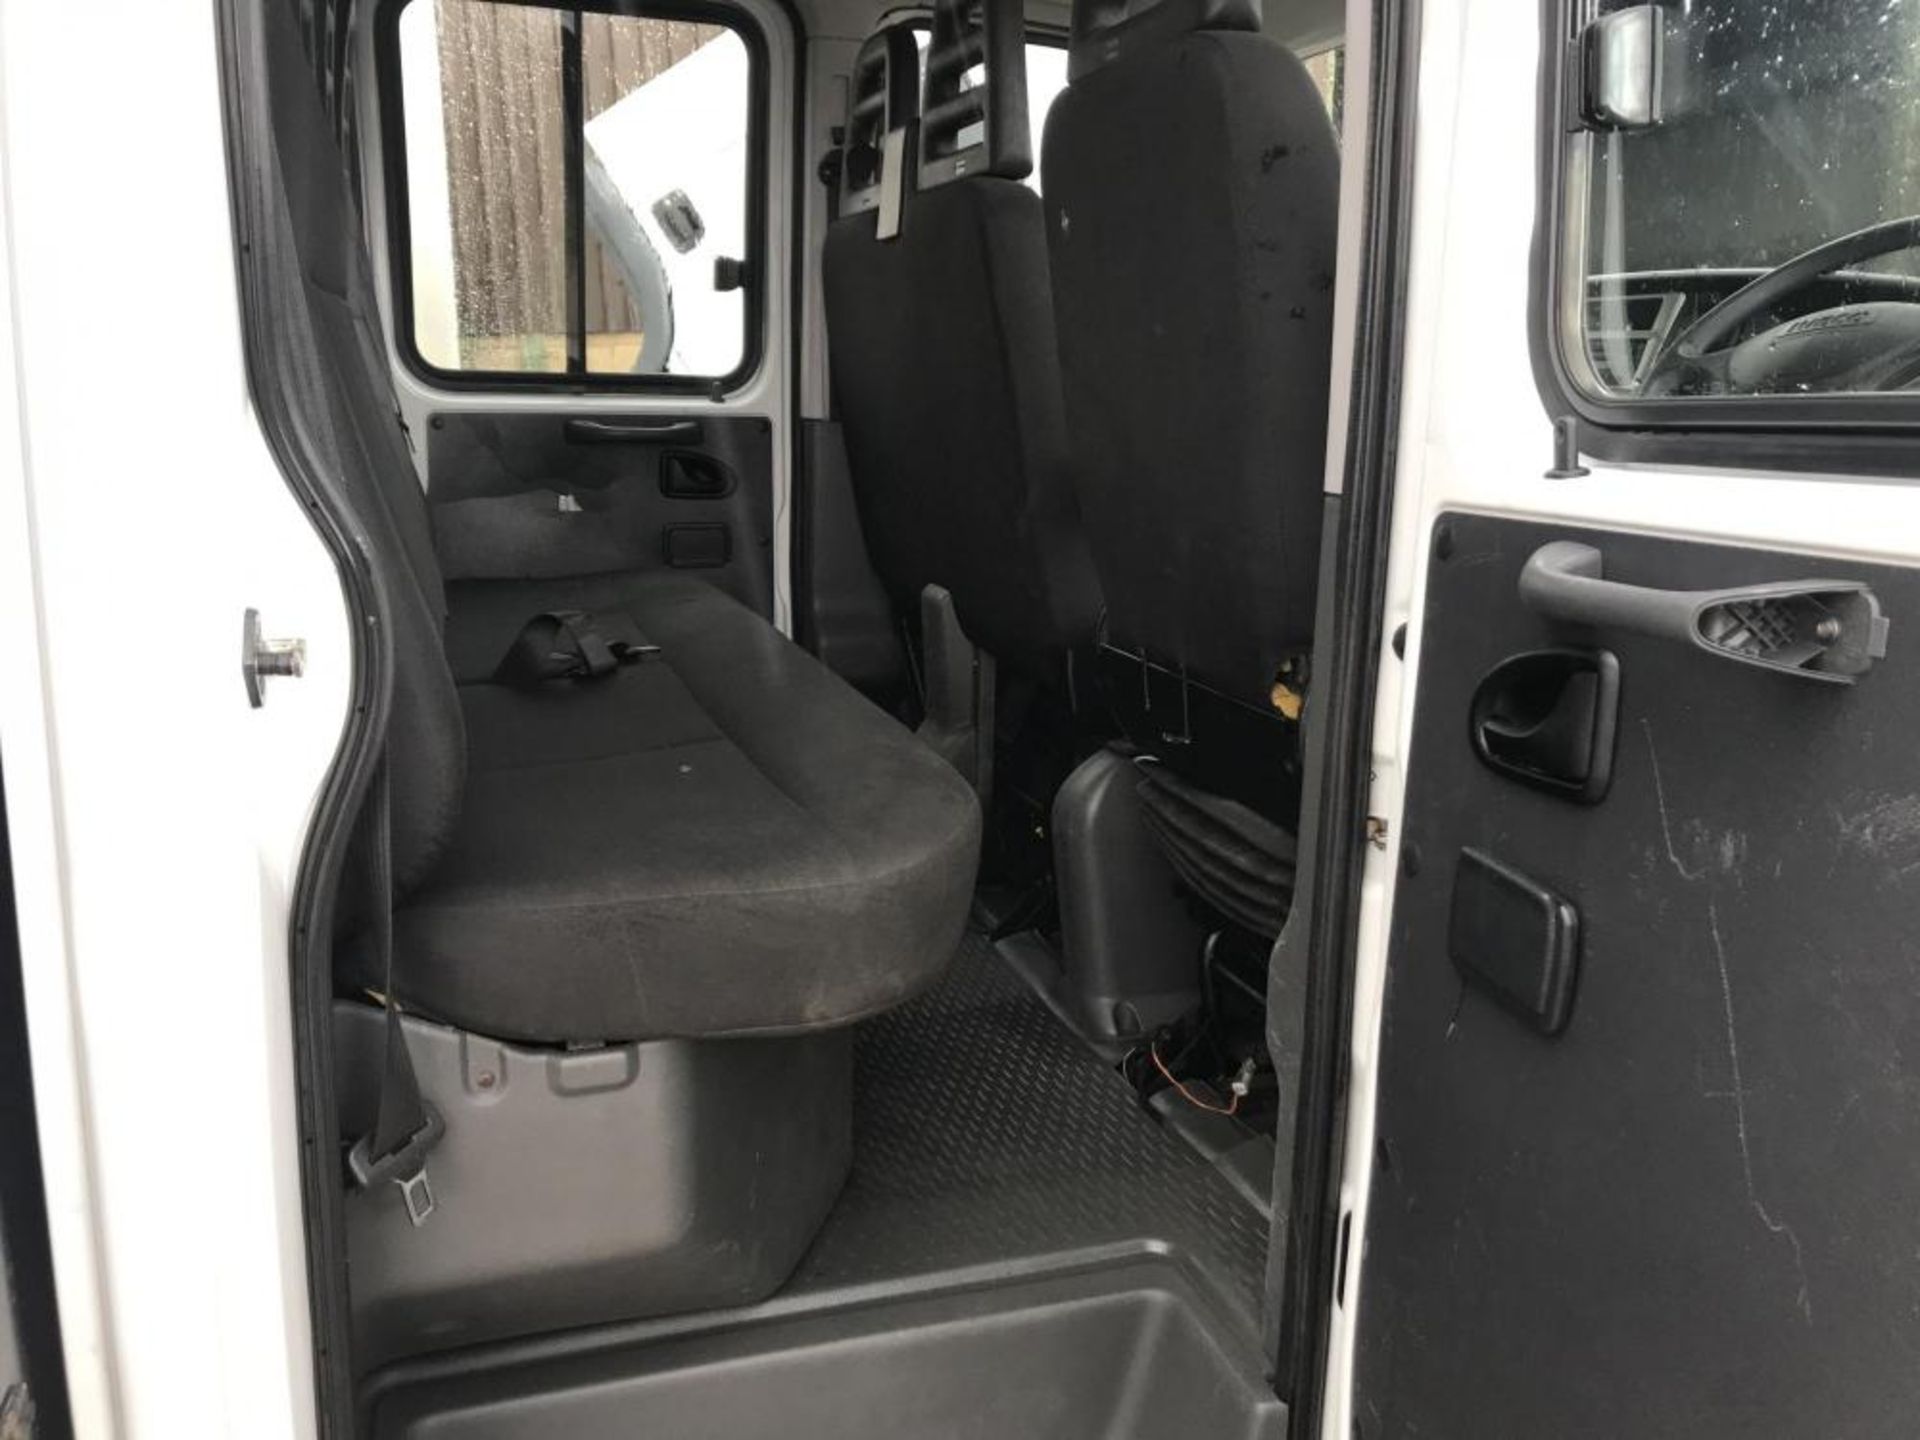 2010/60 REG IVECO DAILY 70C17 CREW CAB TIPPER EX-COUNCIL WITH SIDE BIN LIFT *PLUS VAT* - Image 9 of 12